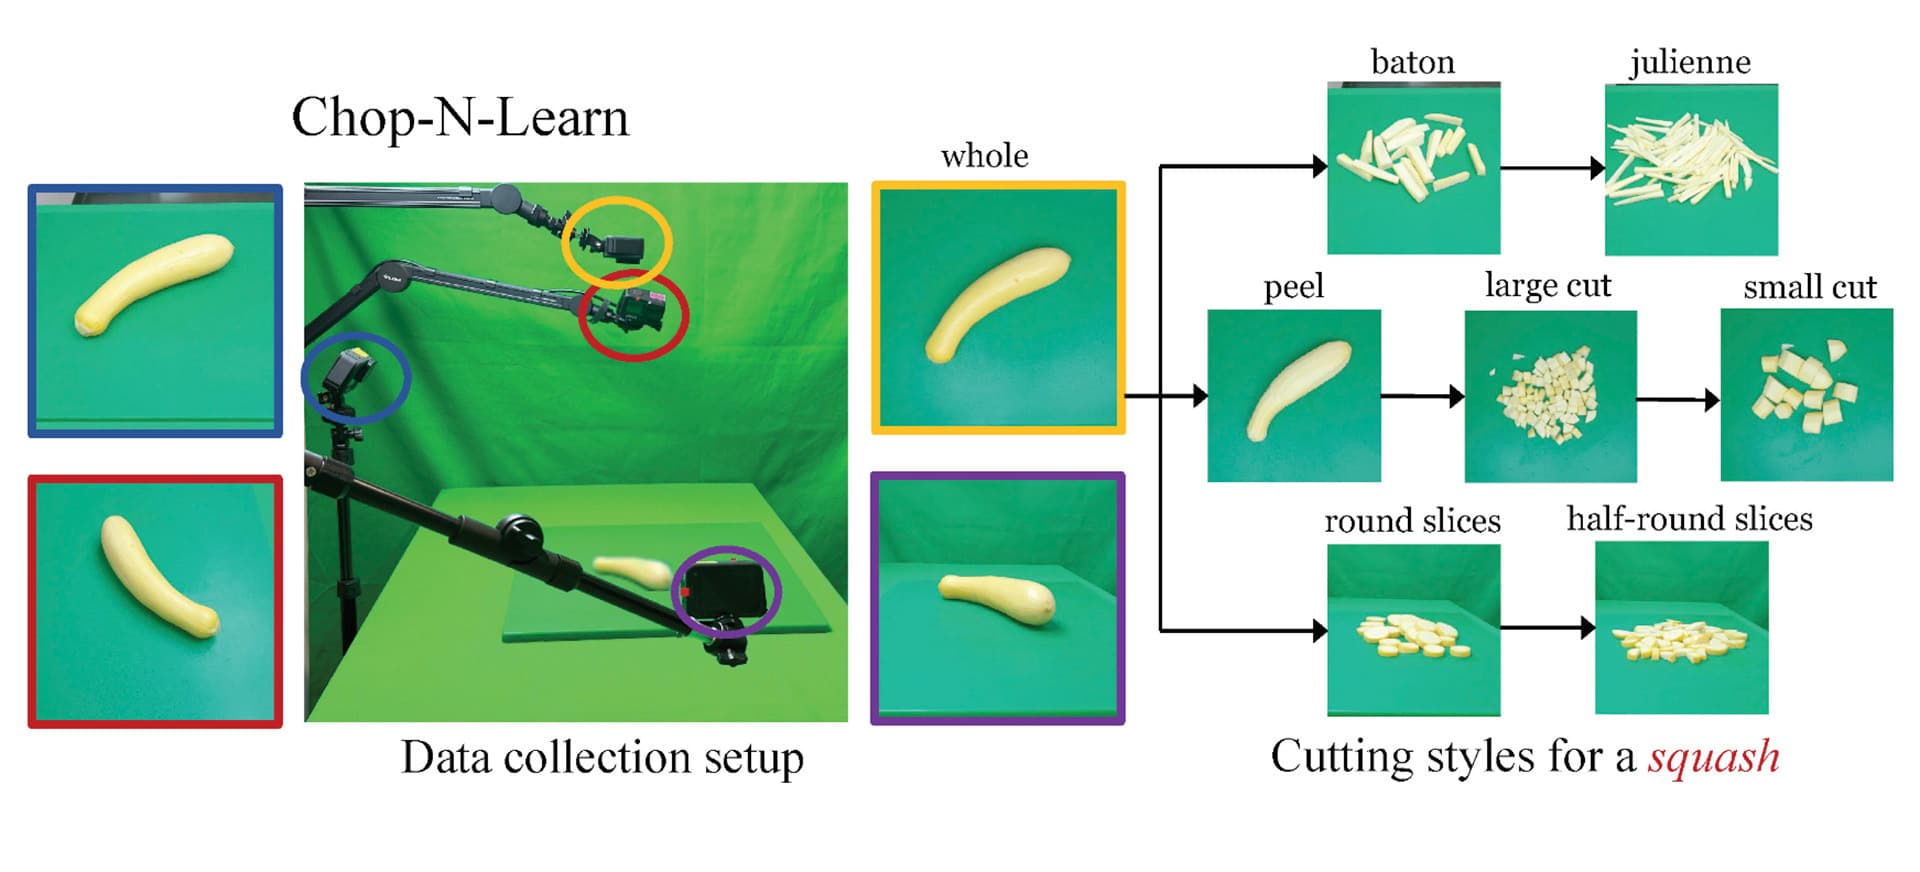 diagram of how system works, showing camera, fruits, and cut up fruits